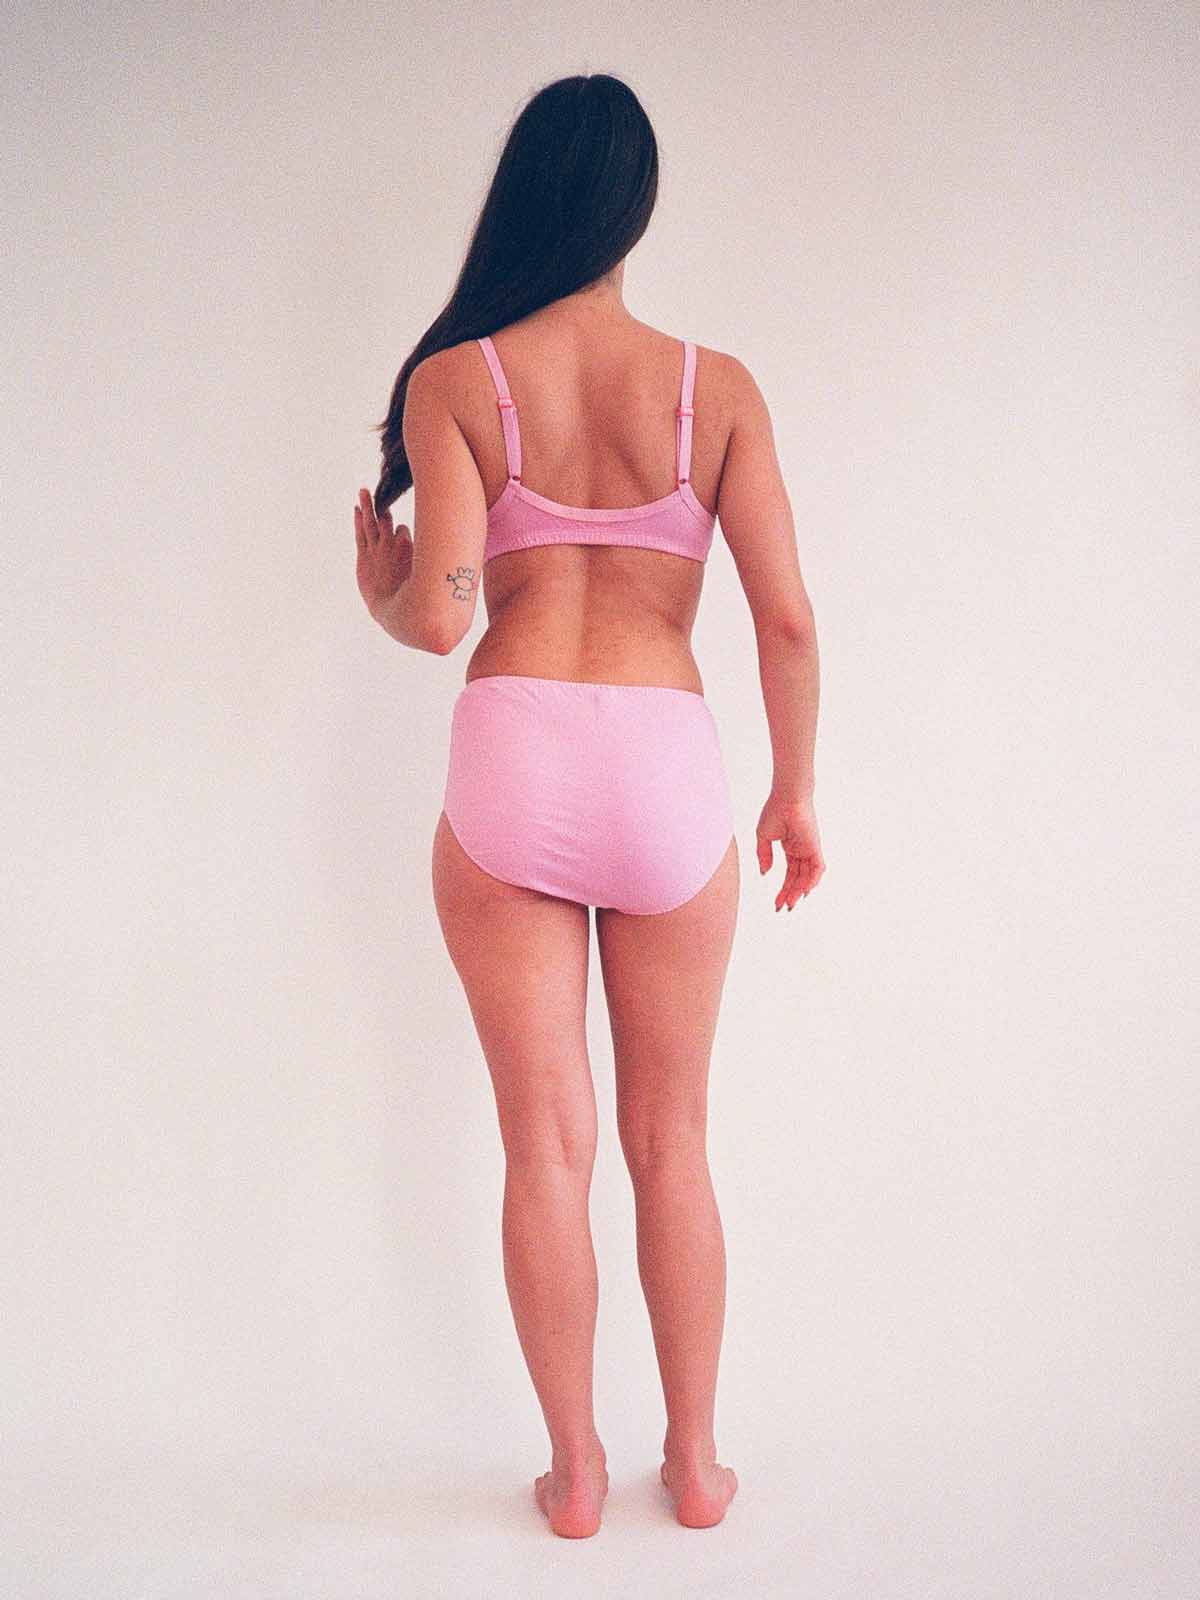 woman wearing pansy sherbet high rise underwear and bra - back view